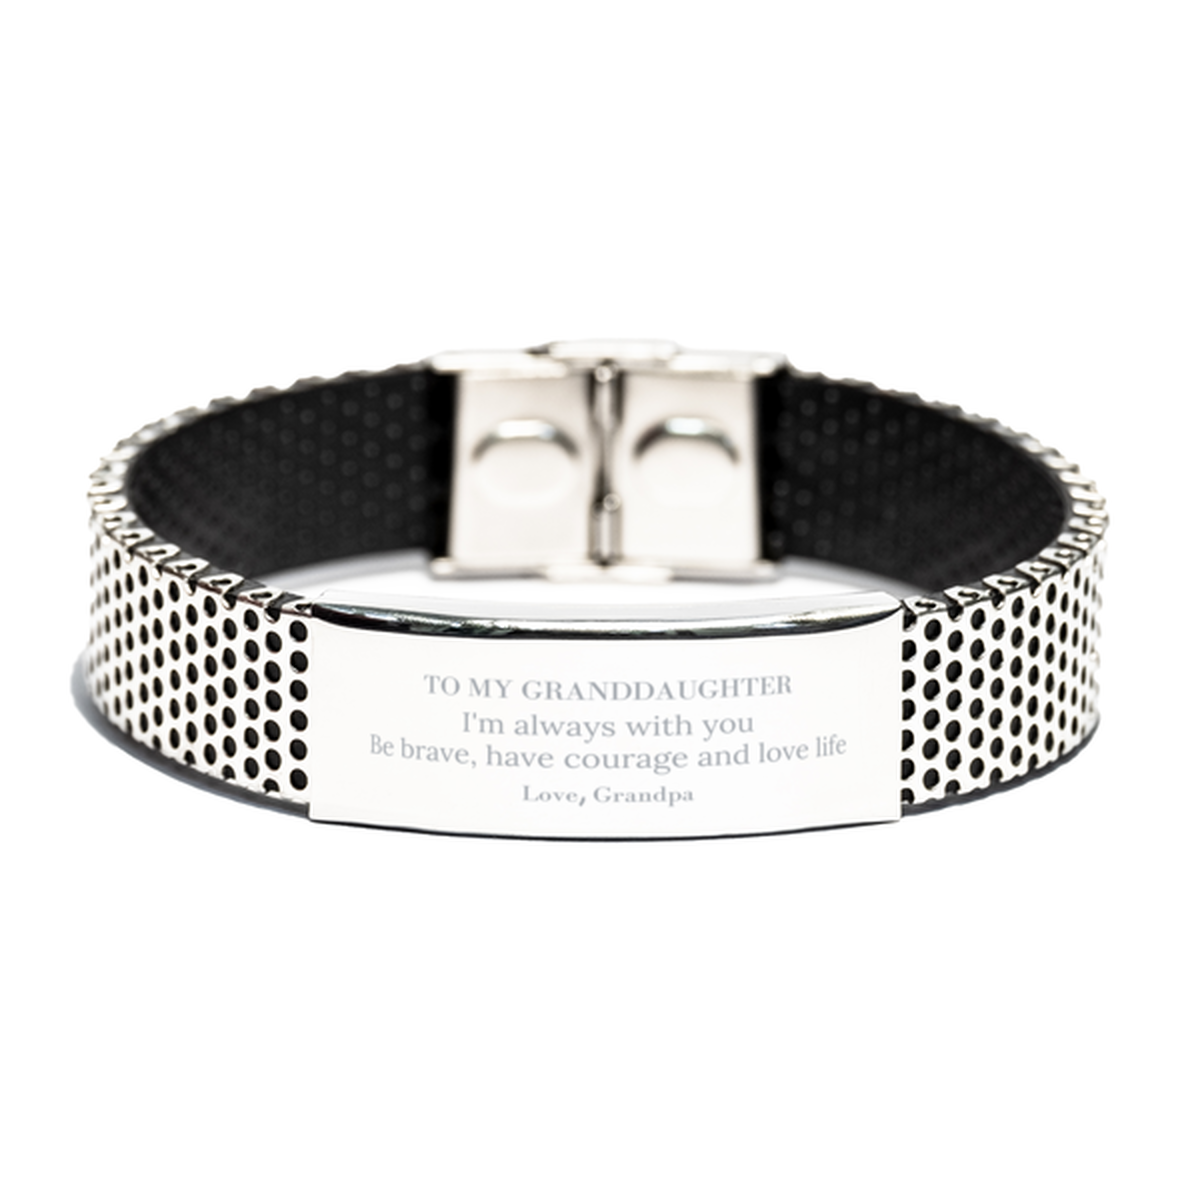 To My Granddaughter Gifts from Grandpa, Unique Stainless Steel Bracelet Inspirational Christmas Birthday Graduation Gifts for Granddaughter I'm always with you. Be brave, have courage and love life. Love, Grandpa